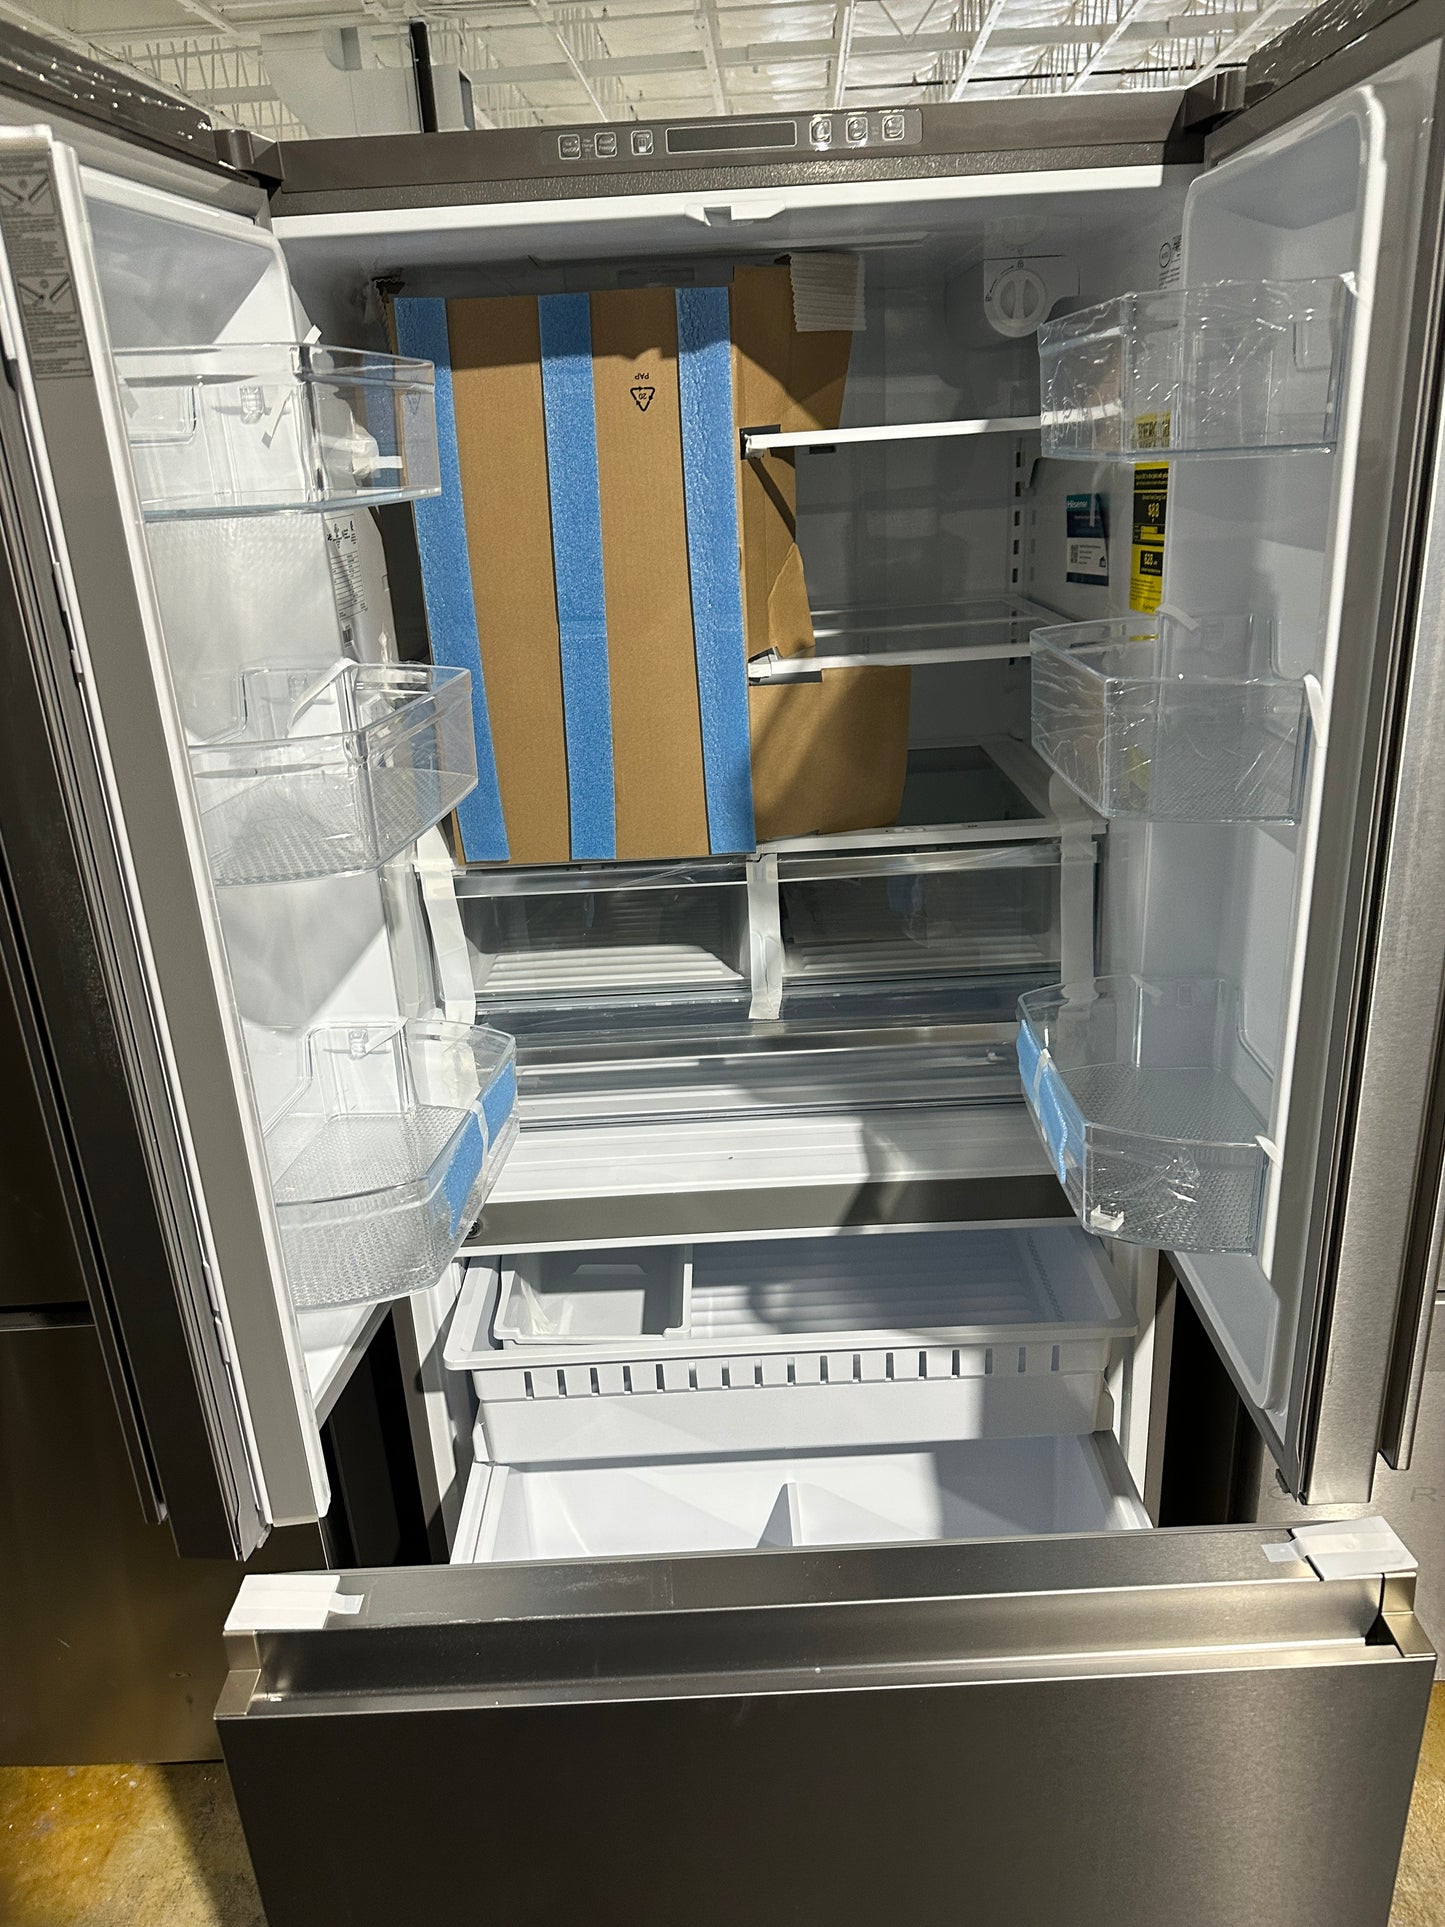 FRENCH DOOR REFRIGERATOR with ICE MAKER - MODEL: HRF266N6CSE1  REF12310S